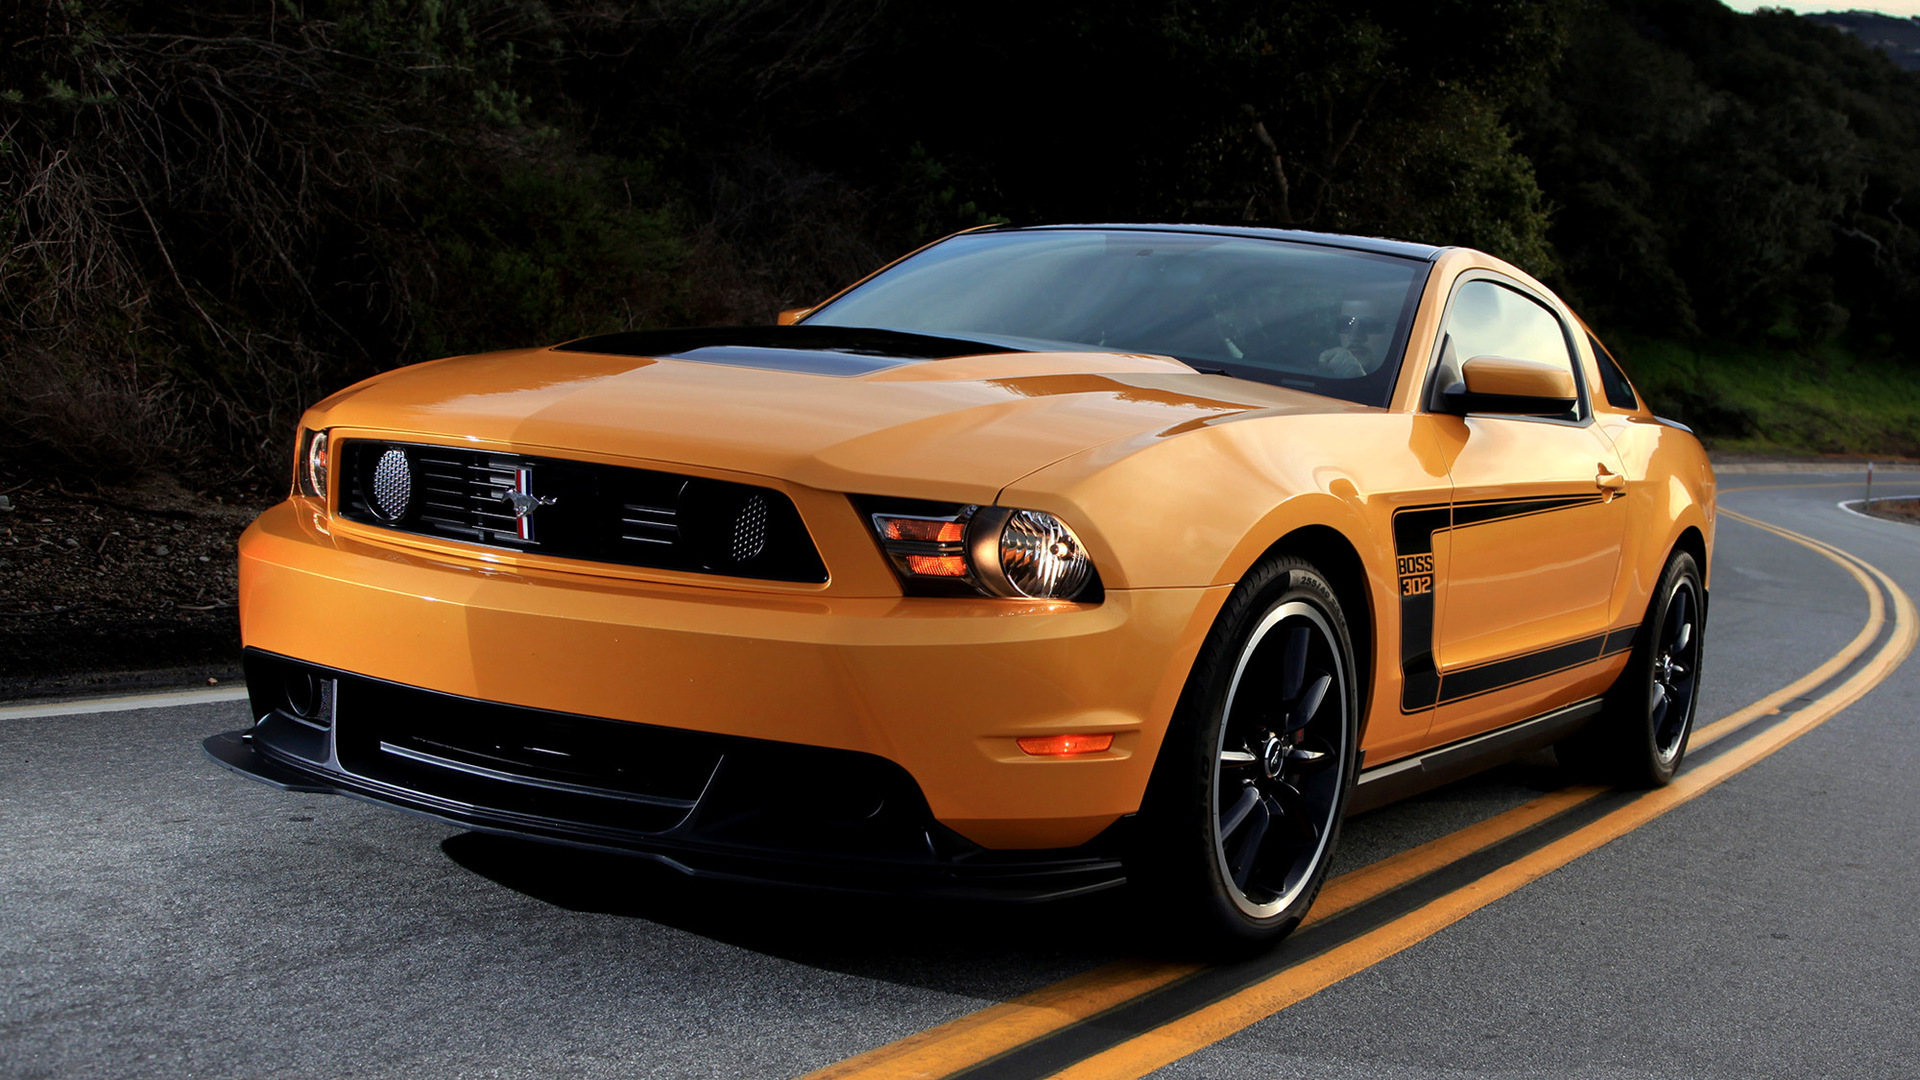 2011 Ford Mustang Boss 302 - Wallpapers and HD Images | Car Pixel